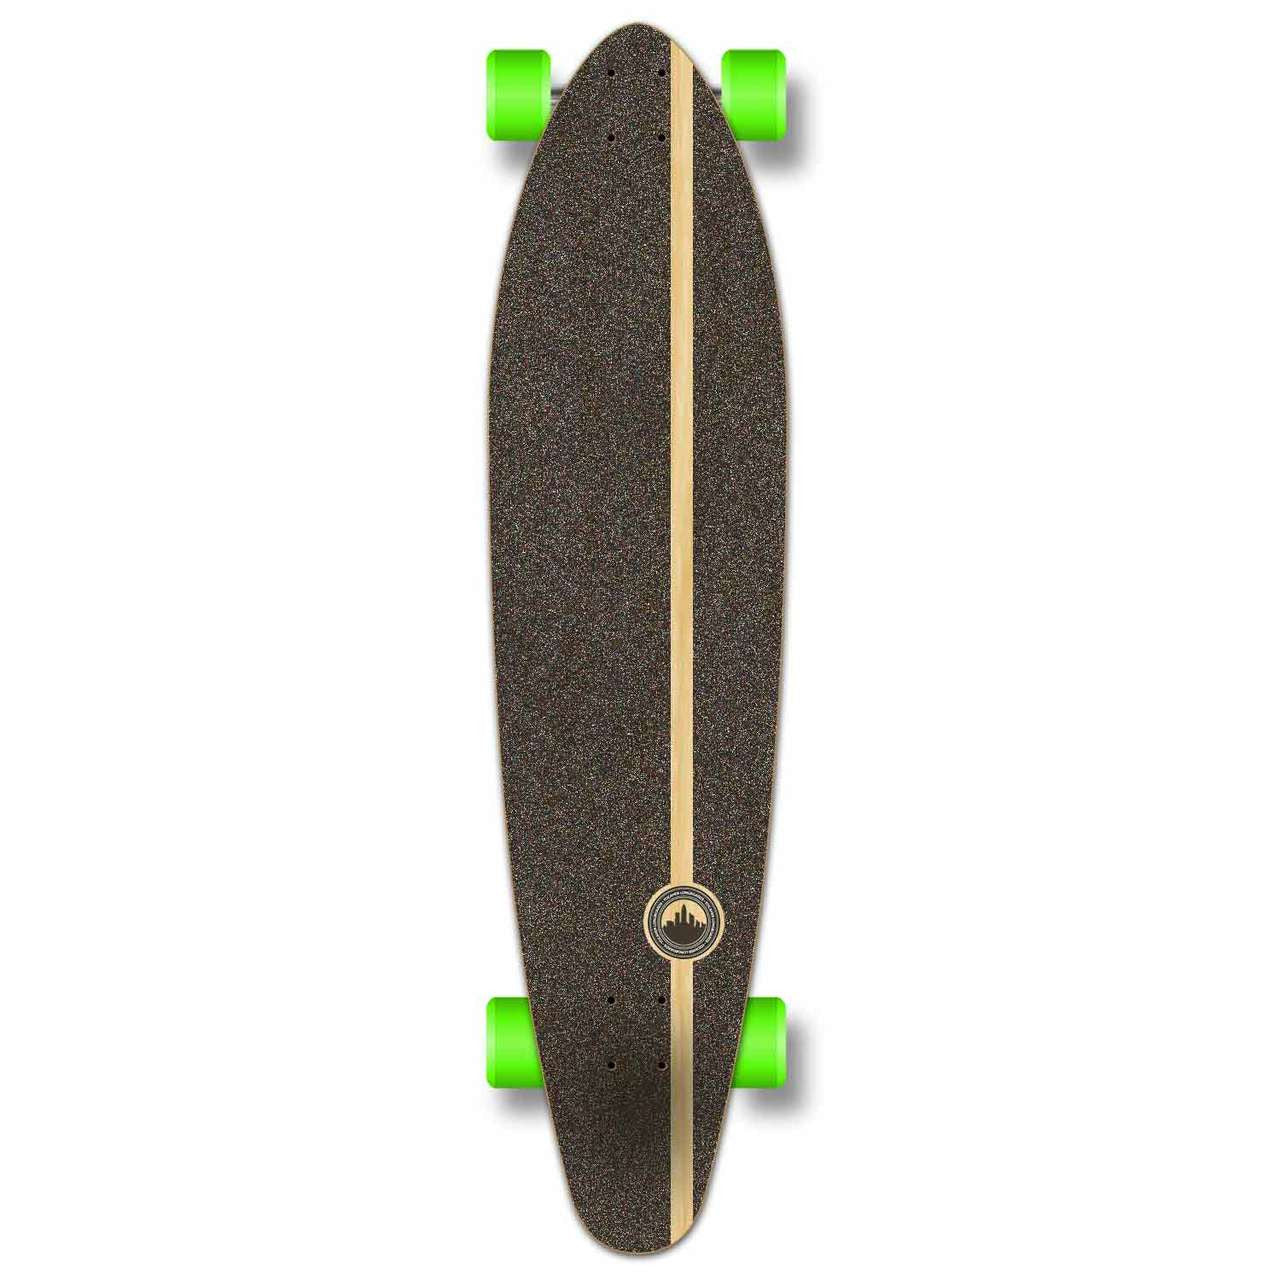 Yocaher Kicktail Longboard Complete - In the Pines : Rasta